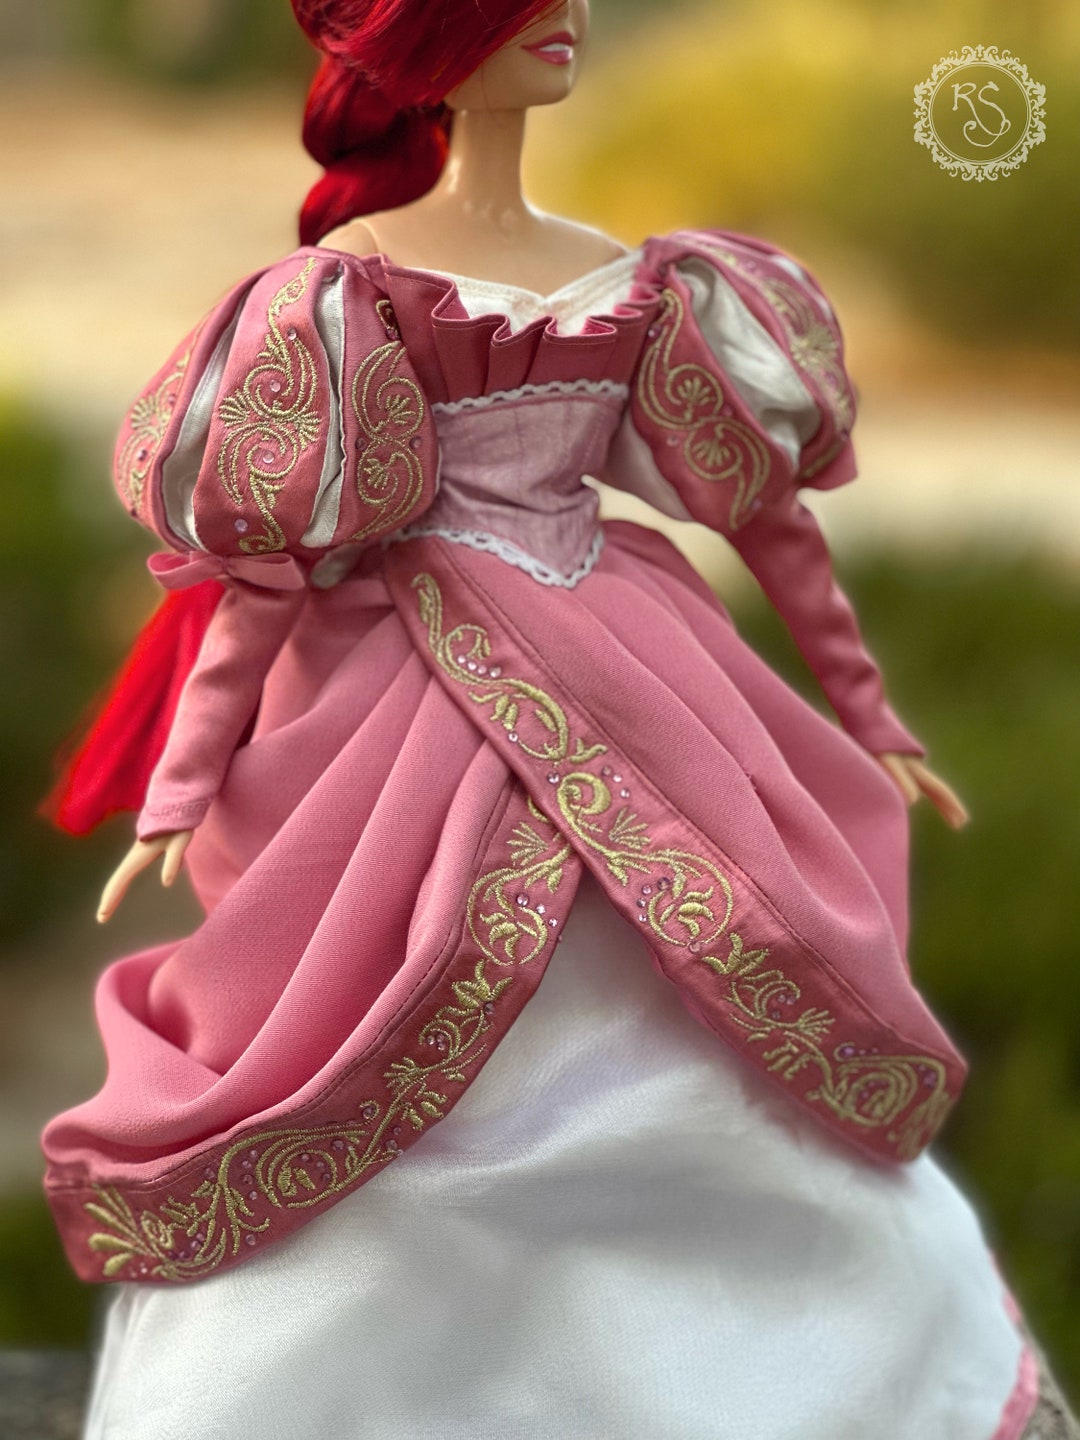 Buy Our New Replica of Limited Doll Ariel D23 Pink Dress From